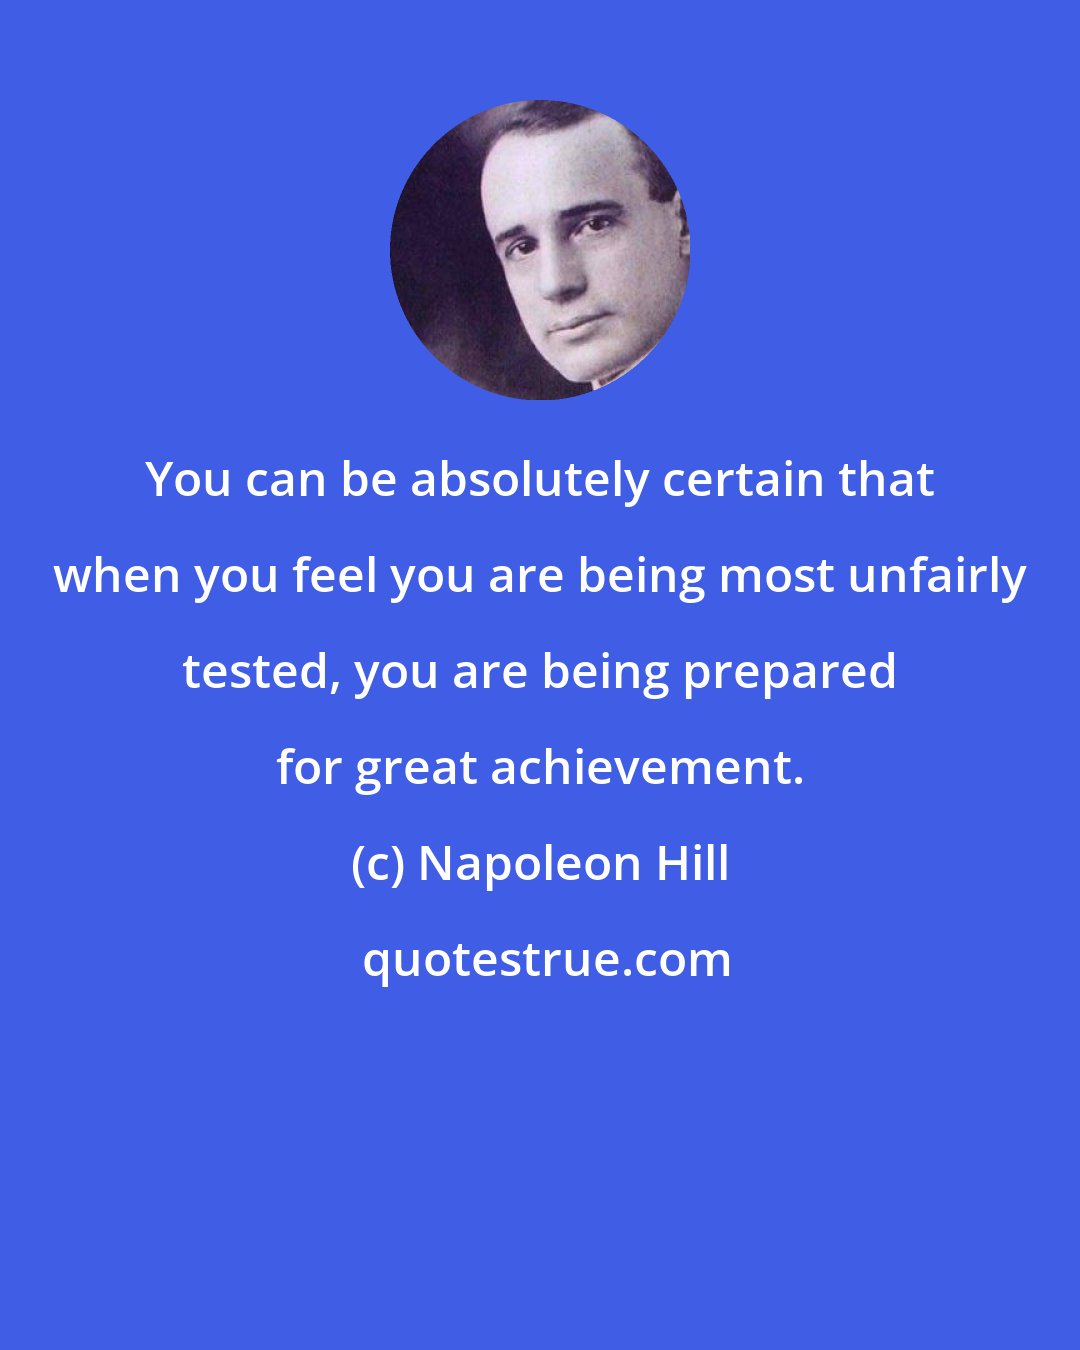 Napoleon Hill: You can be absolutely certain that when you feel you are being most unfairly tested, you are being prepared for great achievement.